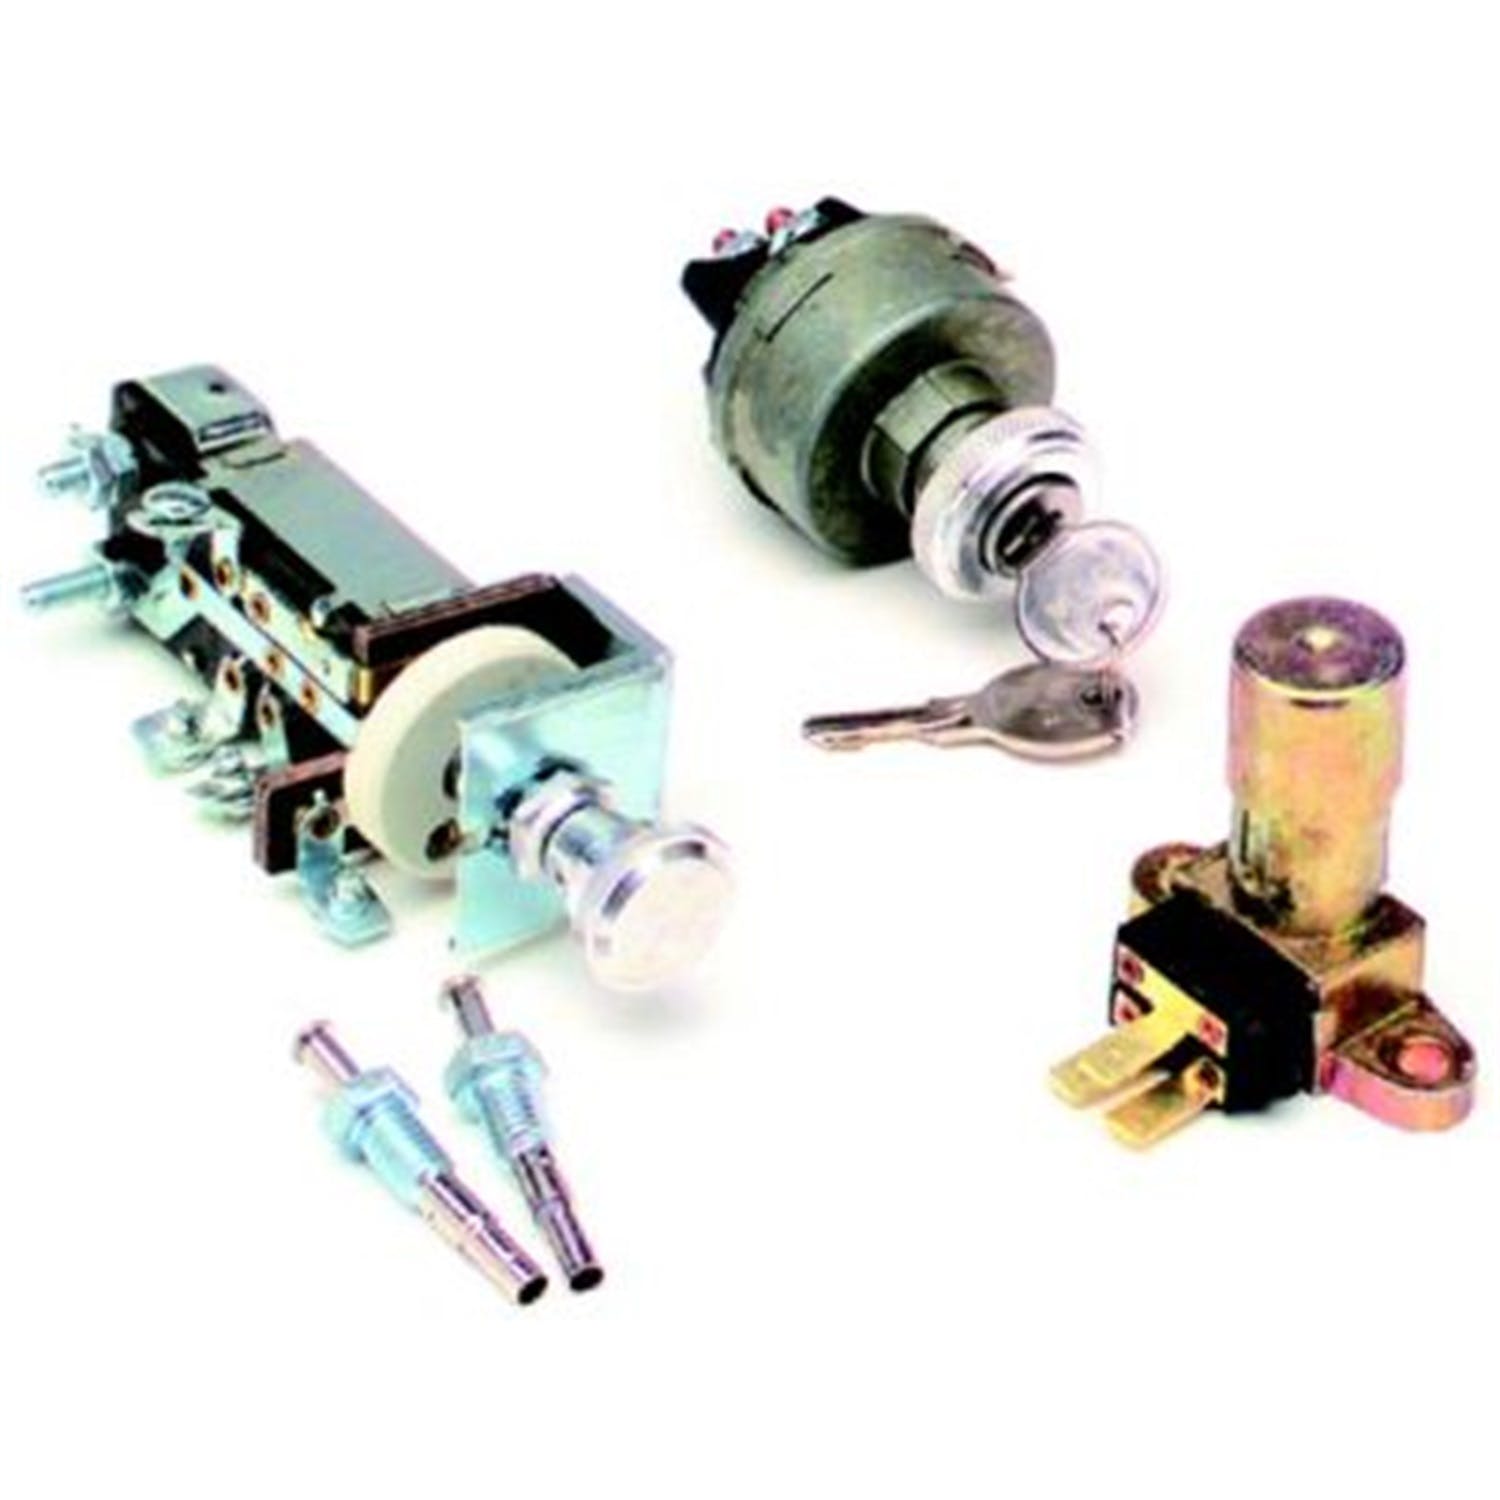 Painless 80121 Head Light Door Jamb Dimmer/Ignition Switch Kit;